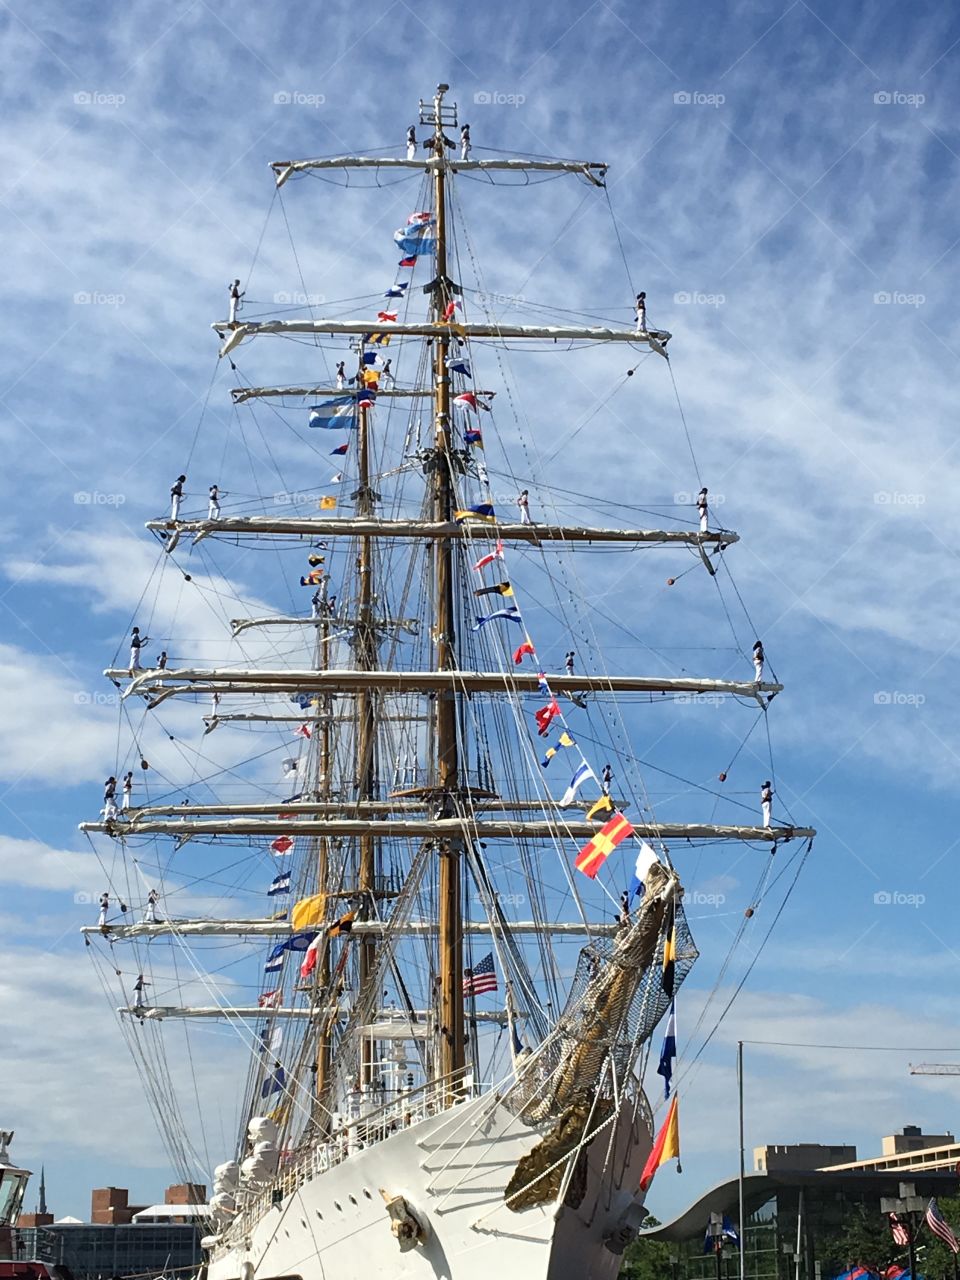 Tall ship in the Baltimore harbor